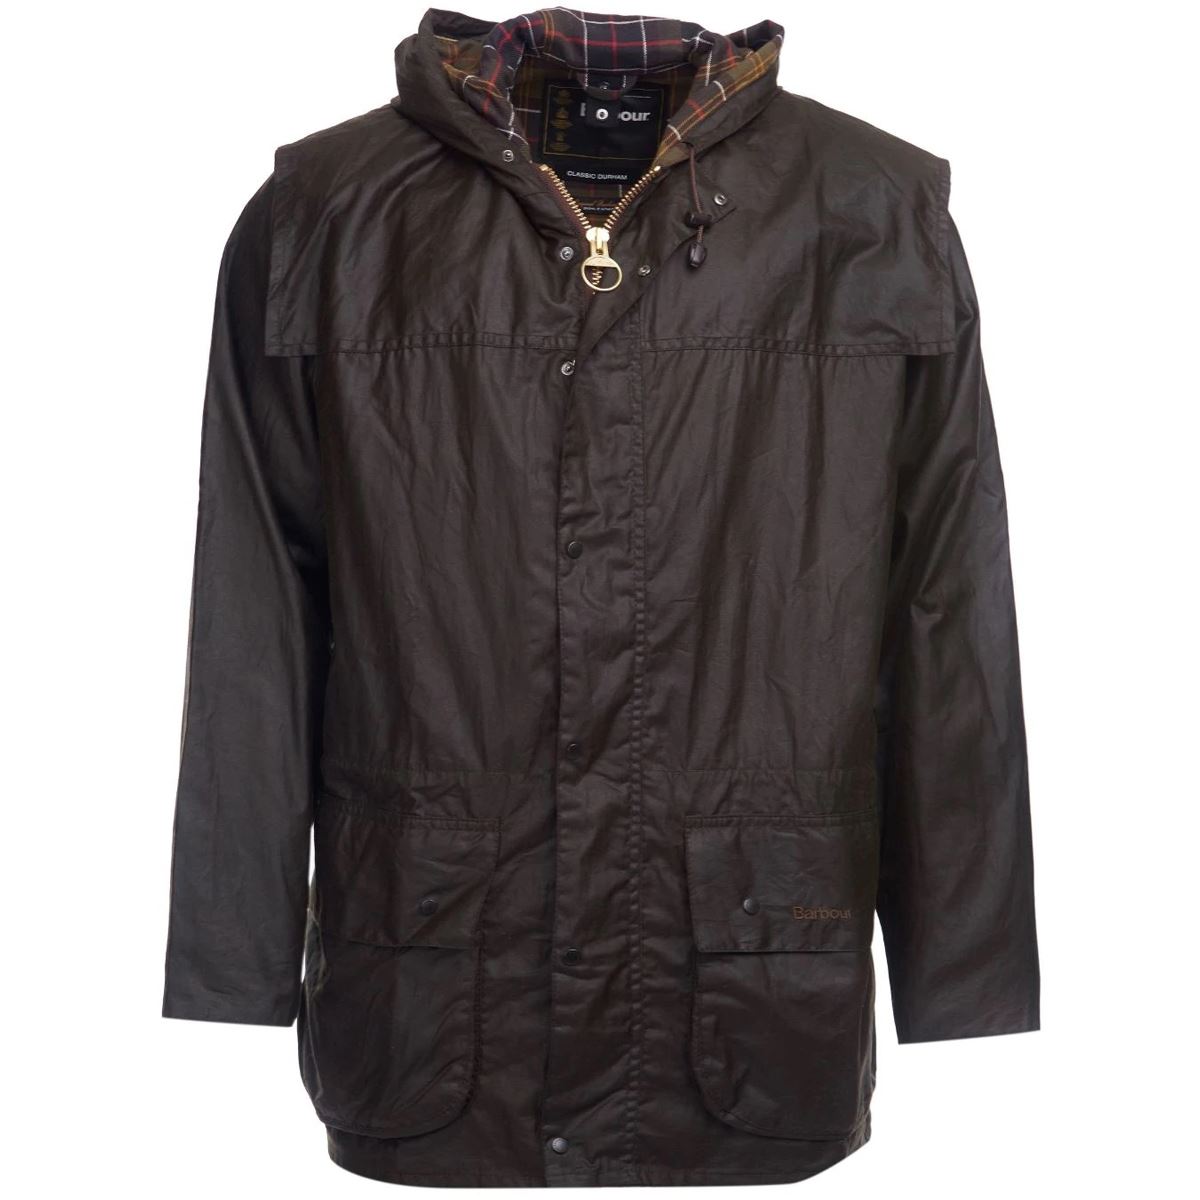 What is the reference number and color of the Barbour Durham Jacket? (Original question)What is the Barbour Durham Jacket's reference number and color? (Rephrased question)